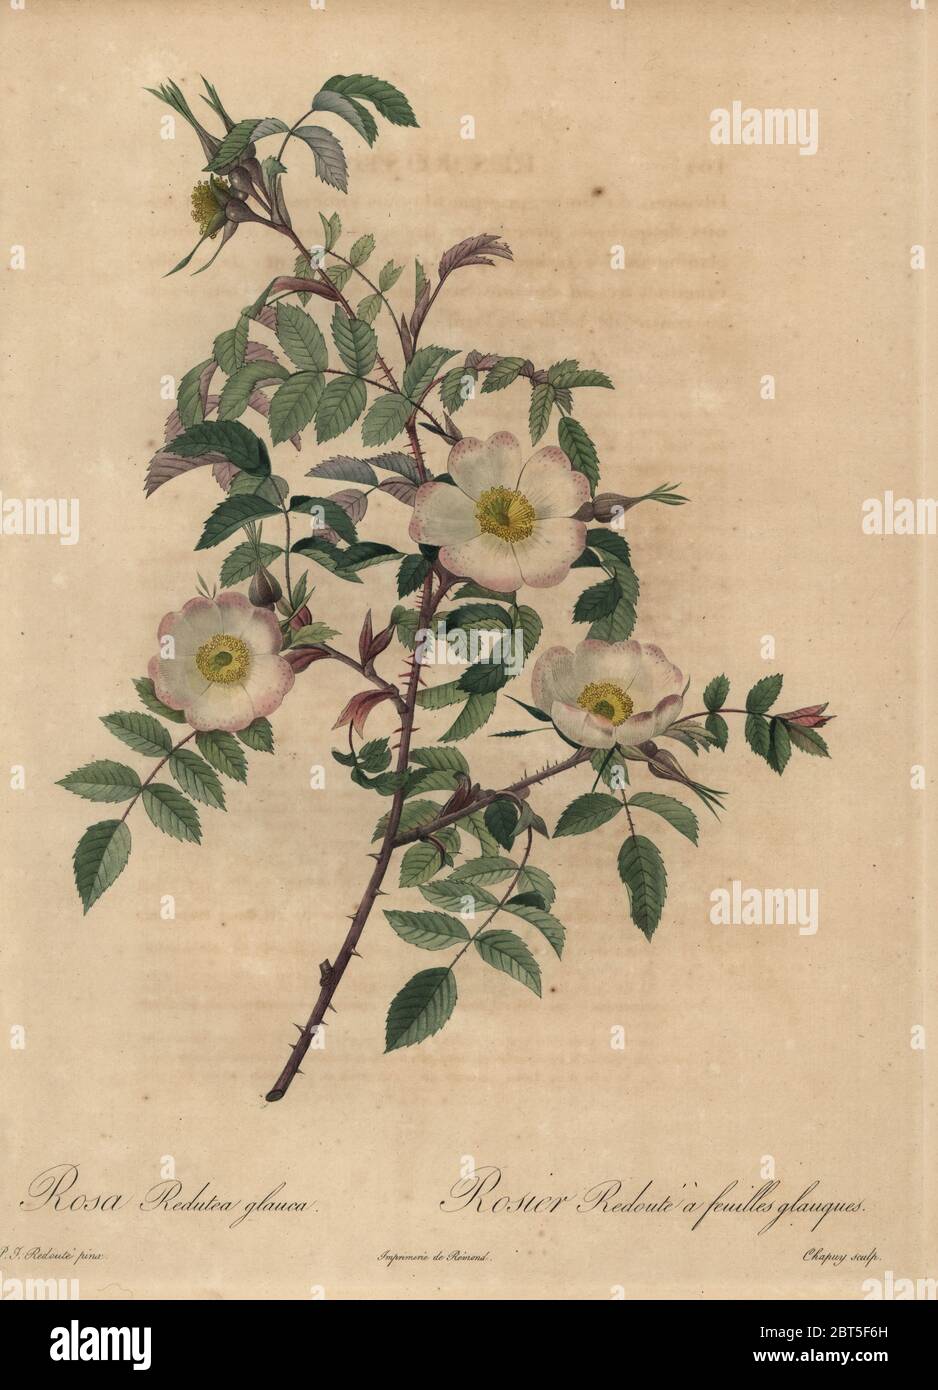 White and pink rose, Rosa redutea glauca, Rosier Redoute a feuilles glauques. Stipple copperplate engraving by Jean Baptiste Chapuy handcoloured a la poupee after a botanical illustration by Pierre-Joseph Redoute from the first folio edition of Les Roses, Firmin Didot, Paris, 1817. Stock Photo